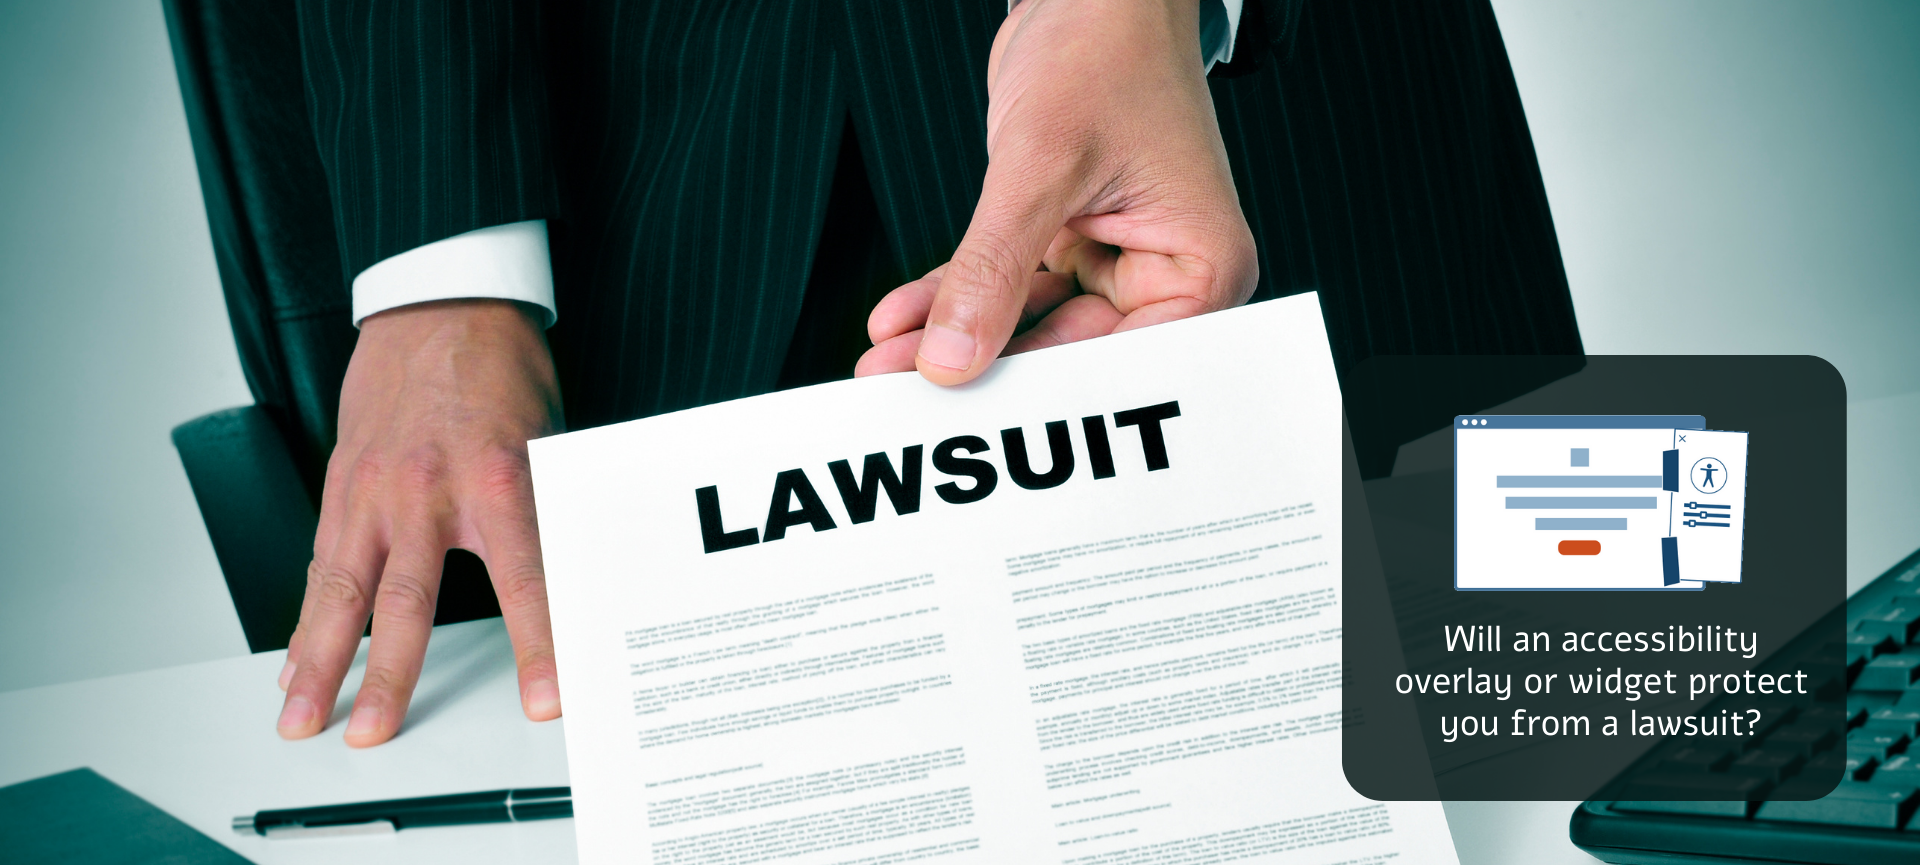 man holding lawsuit papers